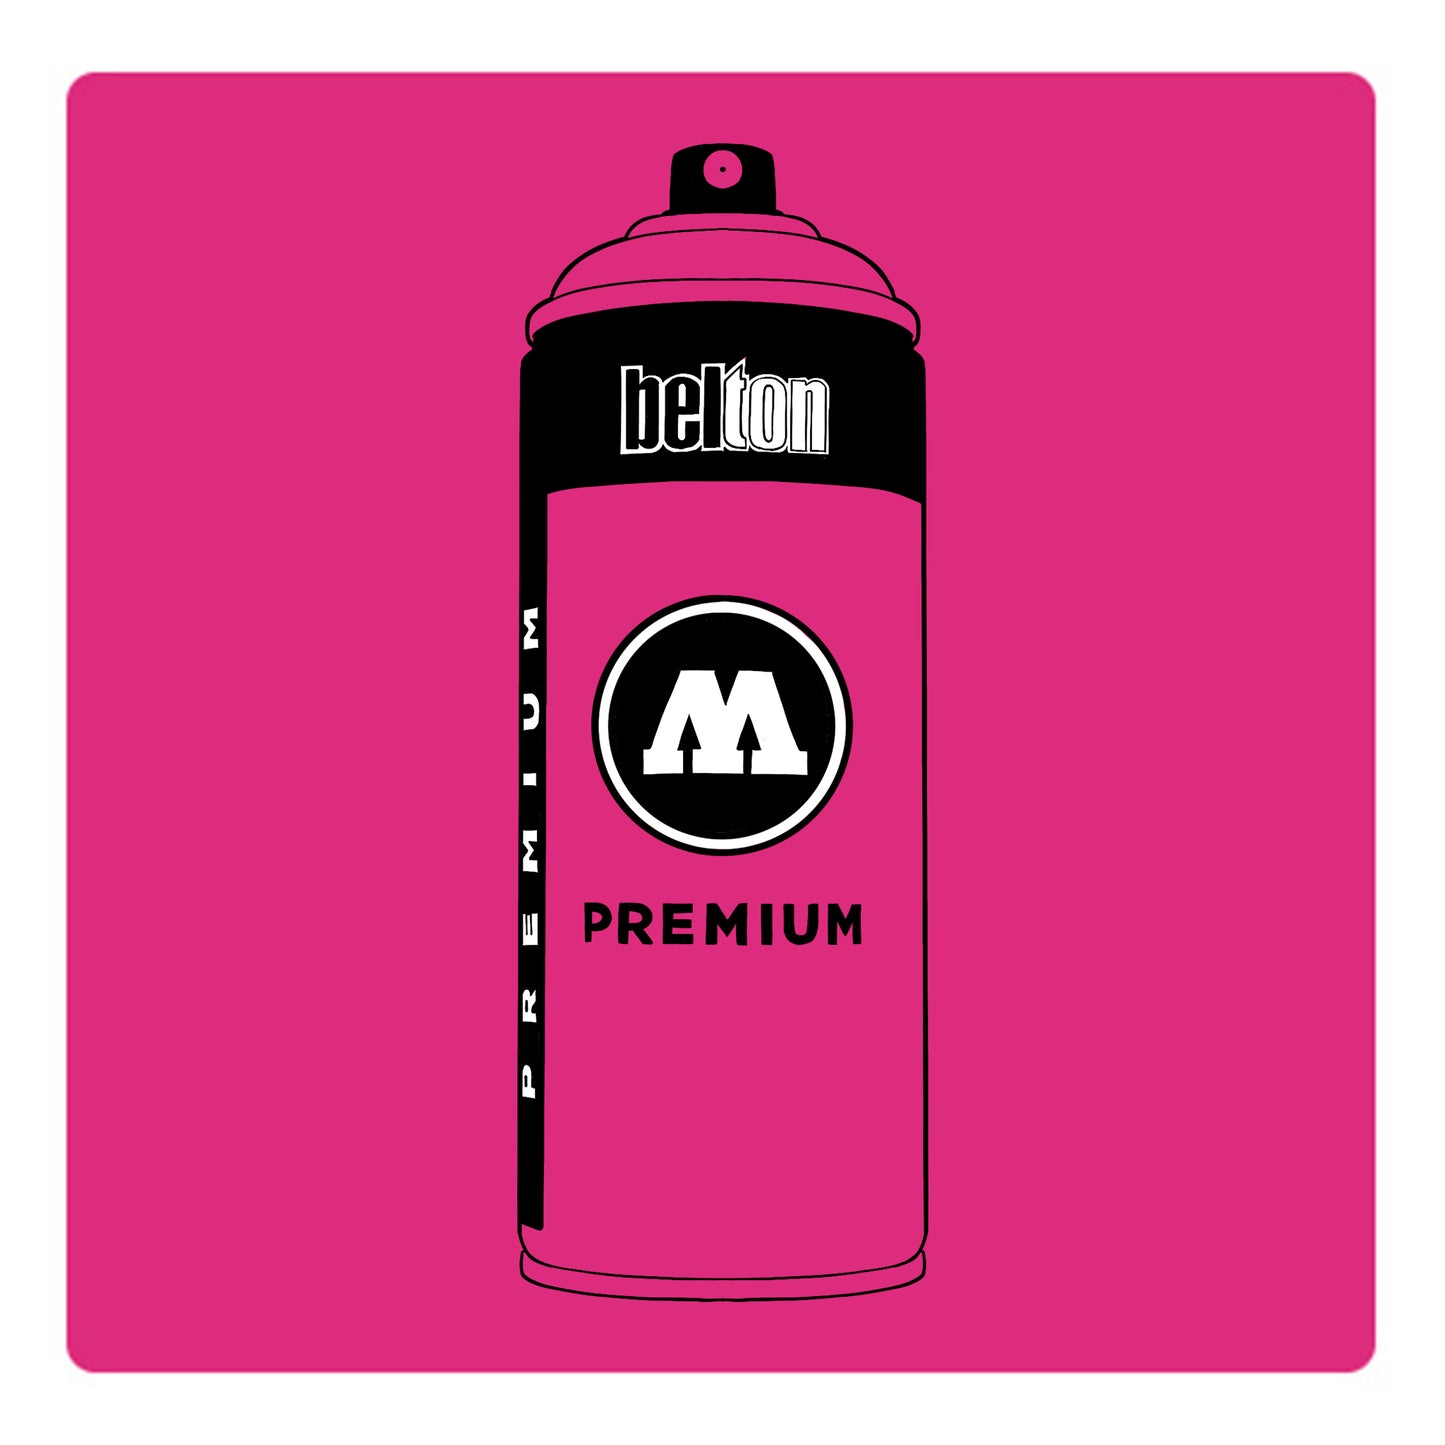 A black outline drawing of a neon hot pink spray paint can with the words "belton","premium" and the letter"M" written on the face in black and white font. The background is a color swatch of the same neon hot pink with a white border.